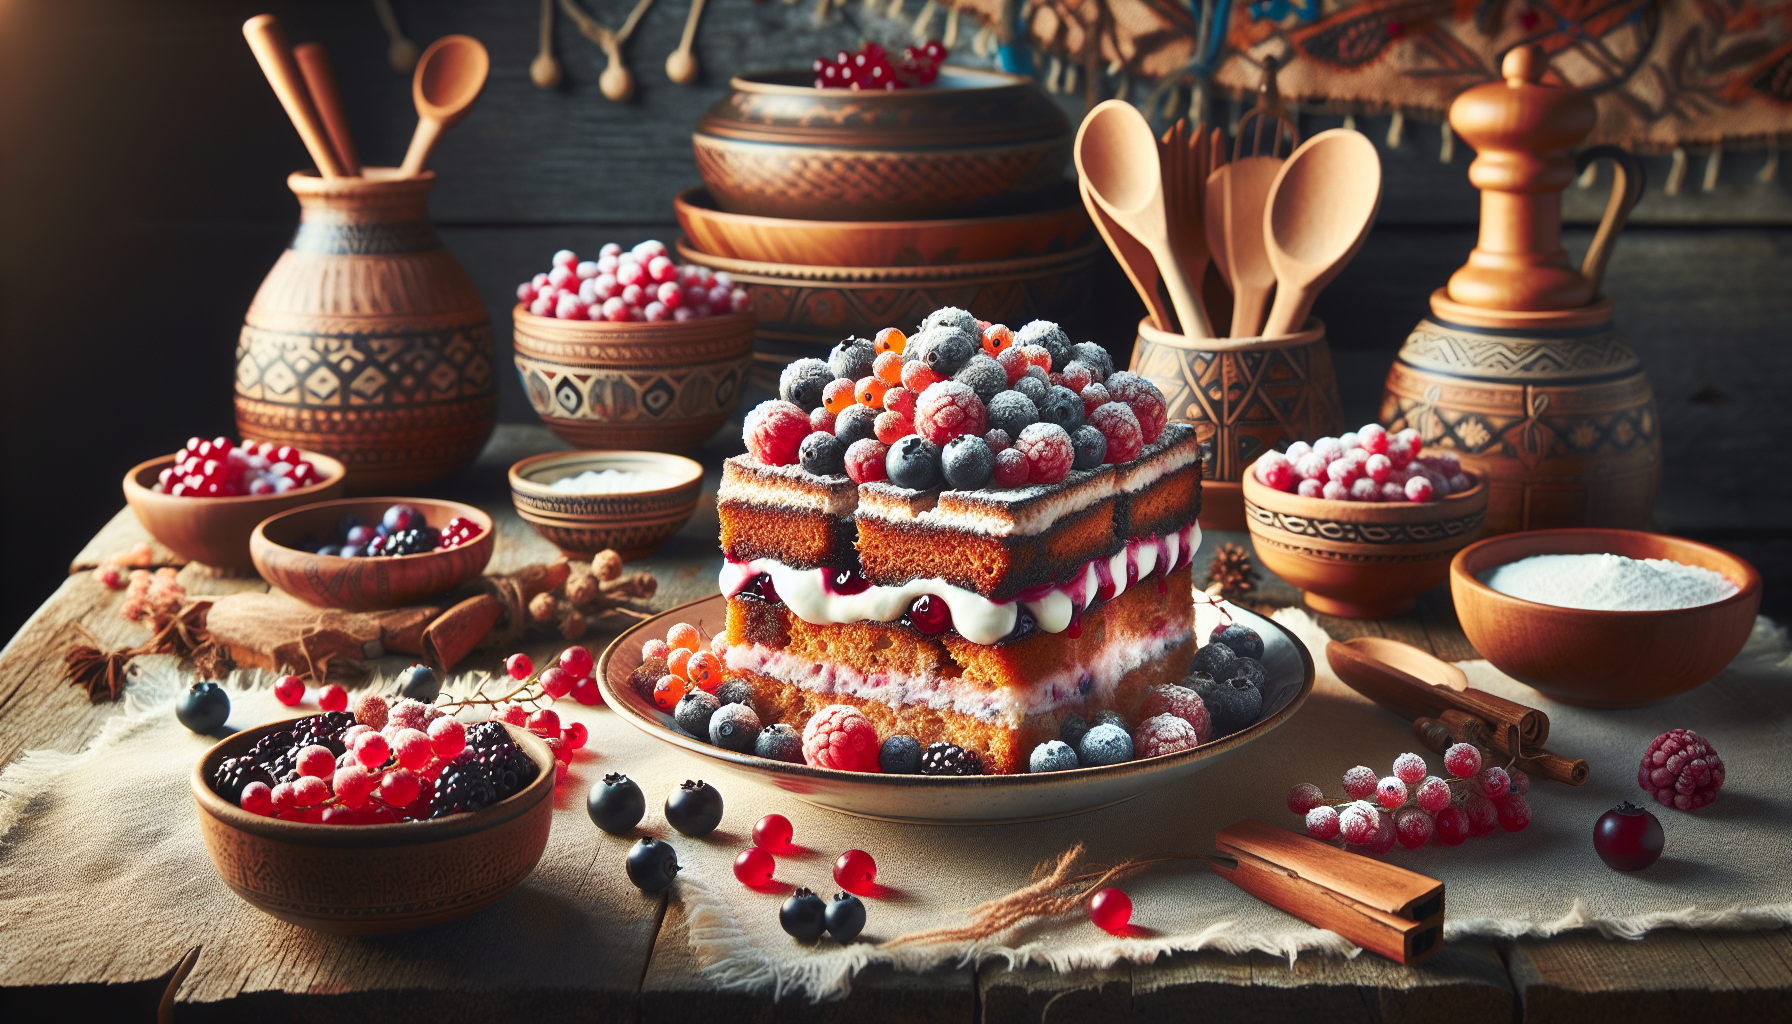 Can You Suggest A Simple And Quick Nordic Dessert For A Sweet Treat?